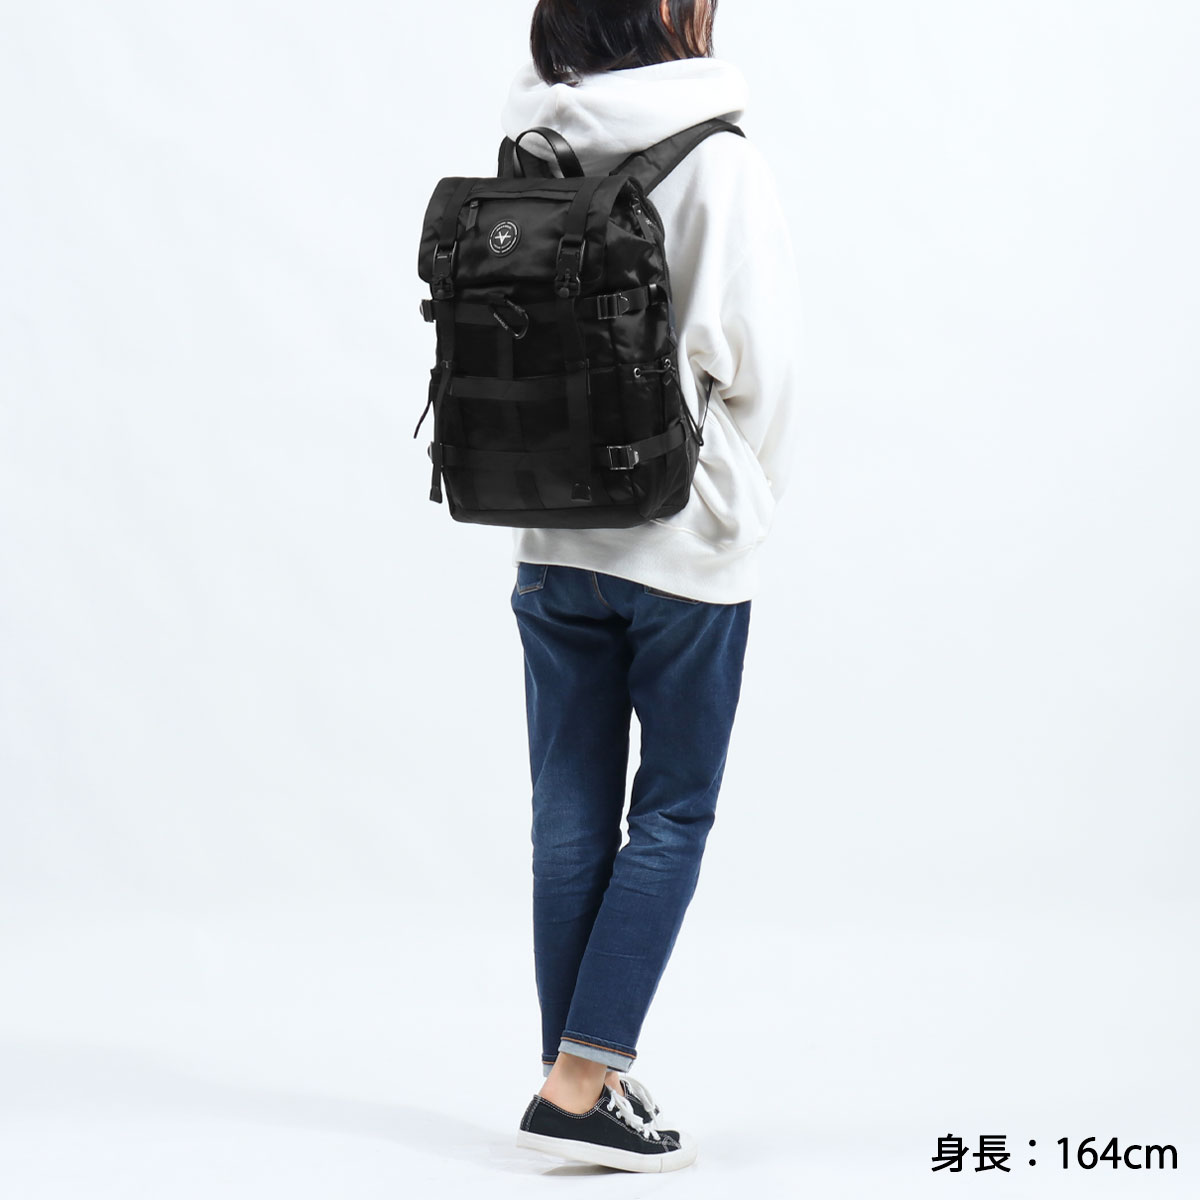 MAKAVELIC マキャベリック X-DESIGN LIMITED MESH WORK BACKPACK 3120 